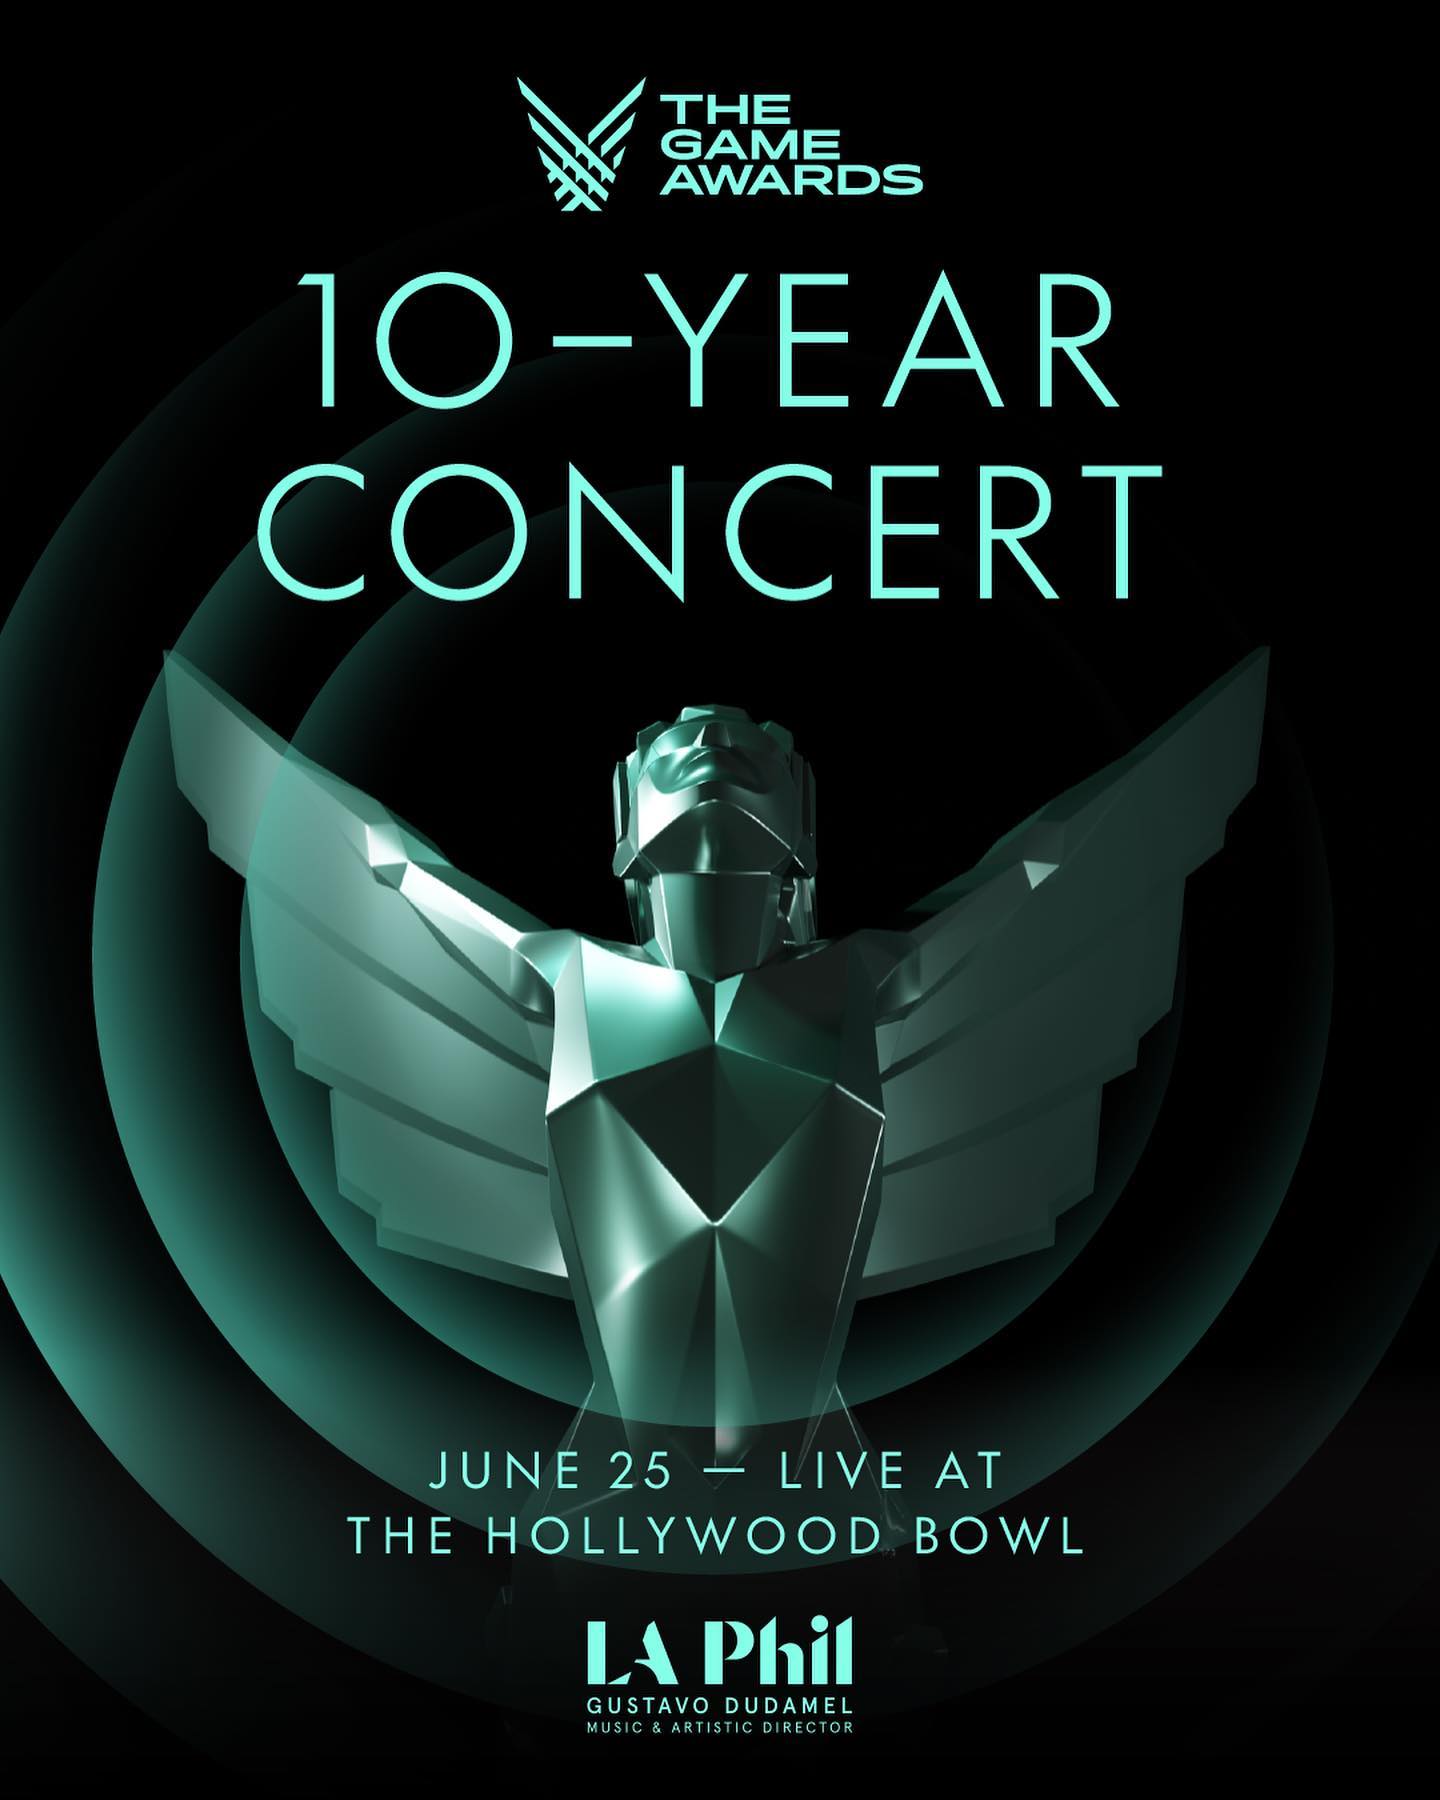 Hollywood Bowl + The Game Awards Concert, News